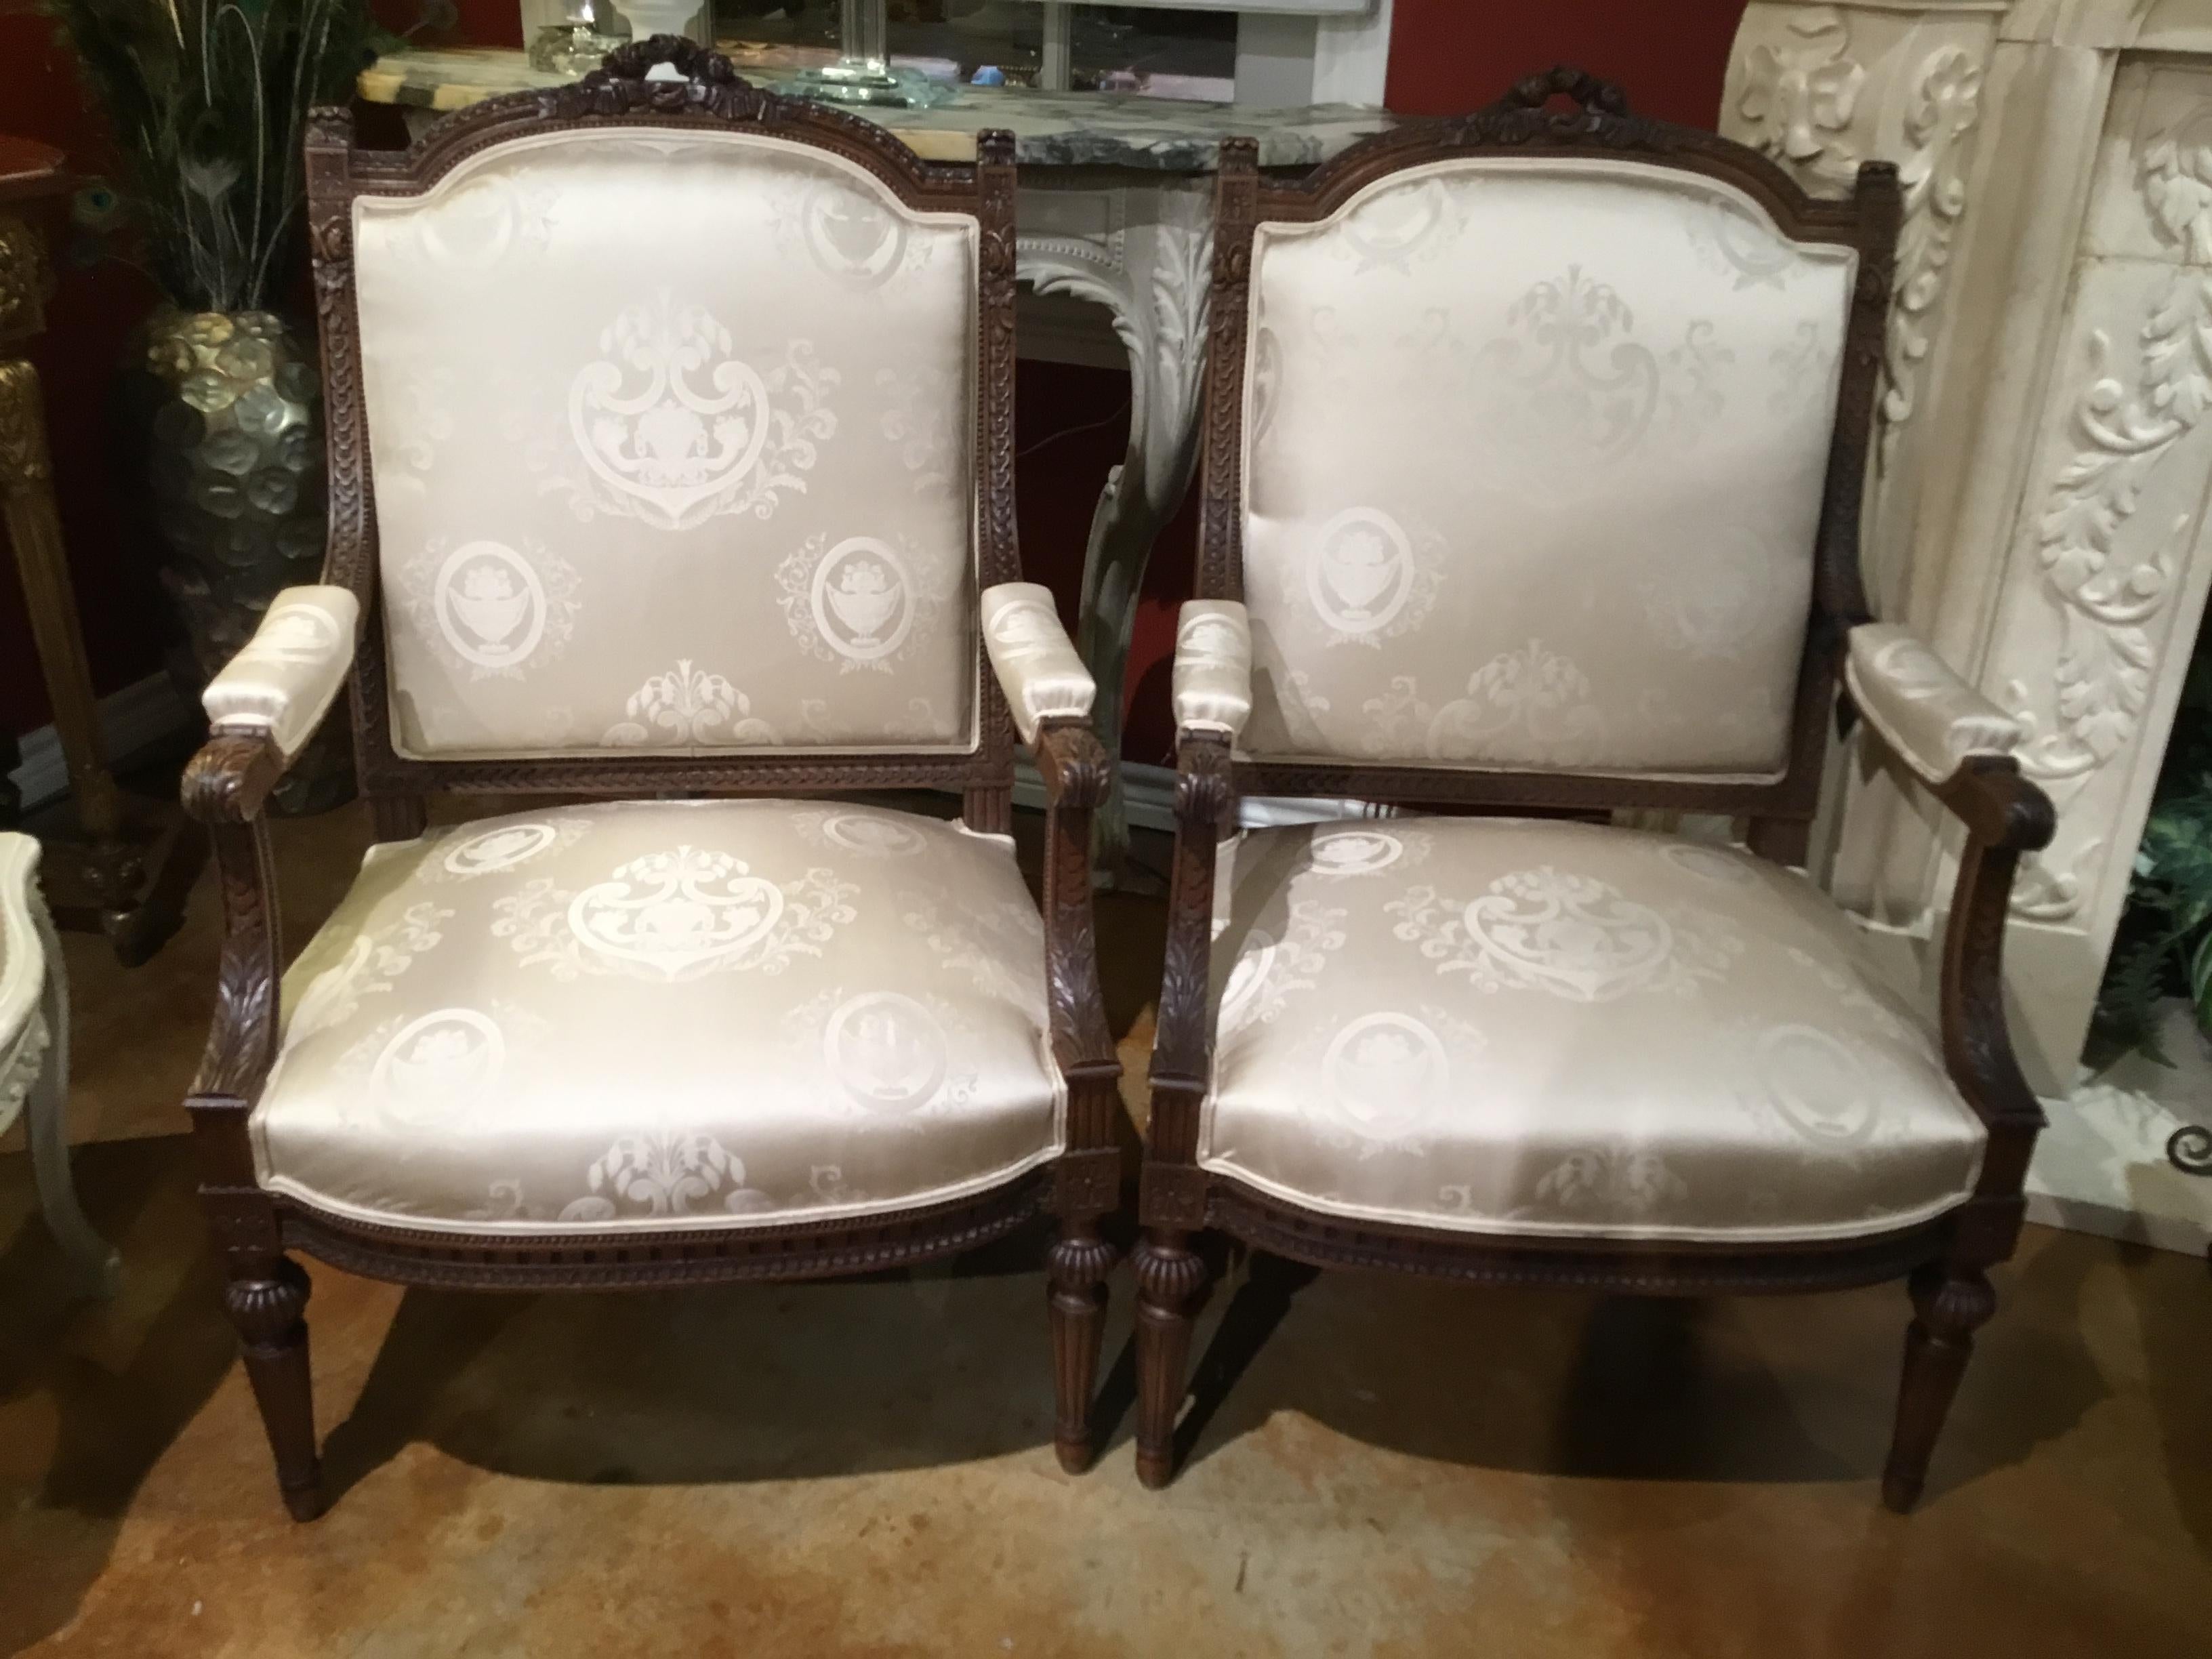 Excellent pair of armchairs in the Louis XVI style with lovely new white silk
Upholstery having a reeded leg and a graceful arm.